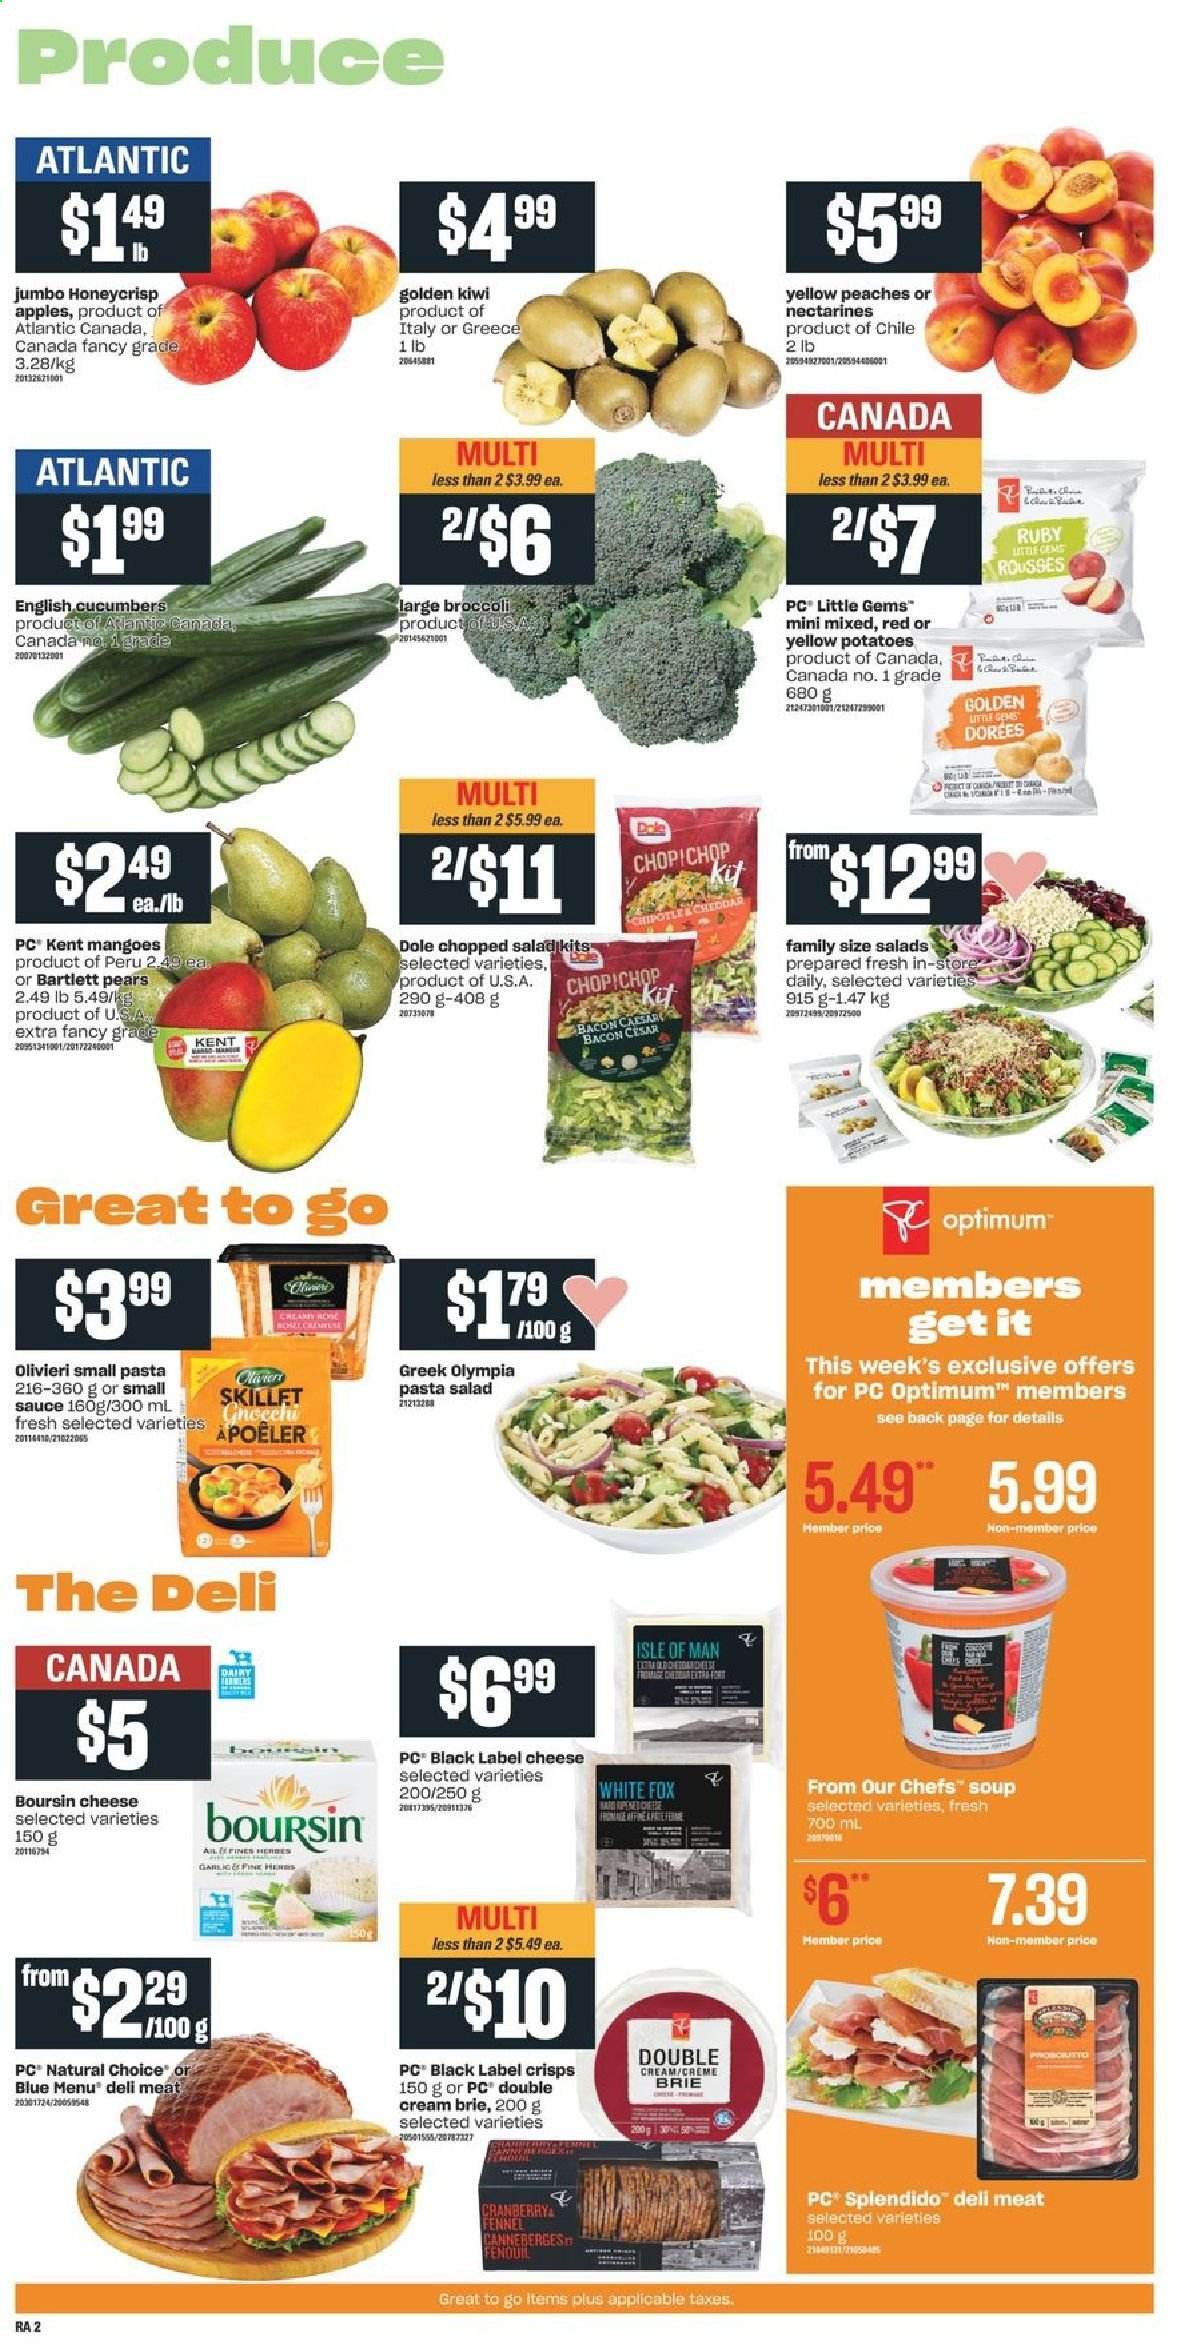 Atlantic Superstore flyer  - February 11, 2021 - February 17, 2021. Page 3.